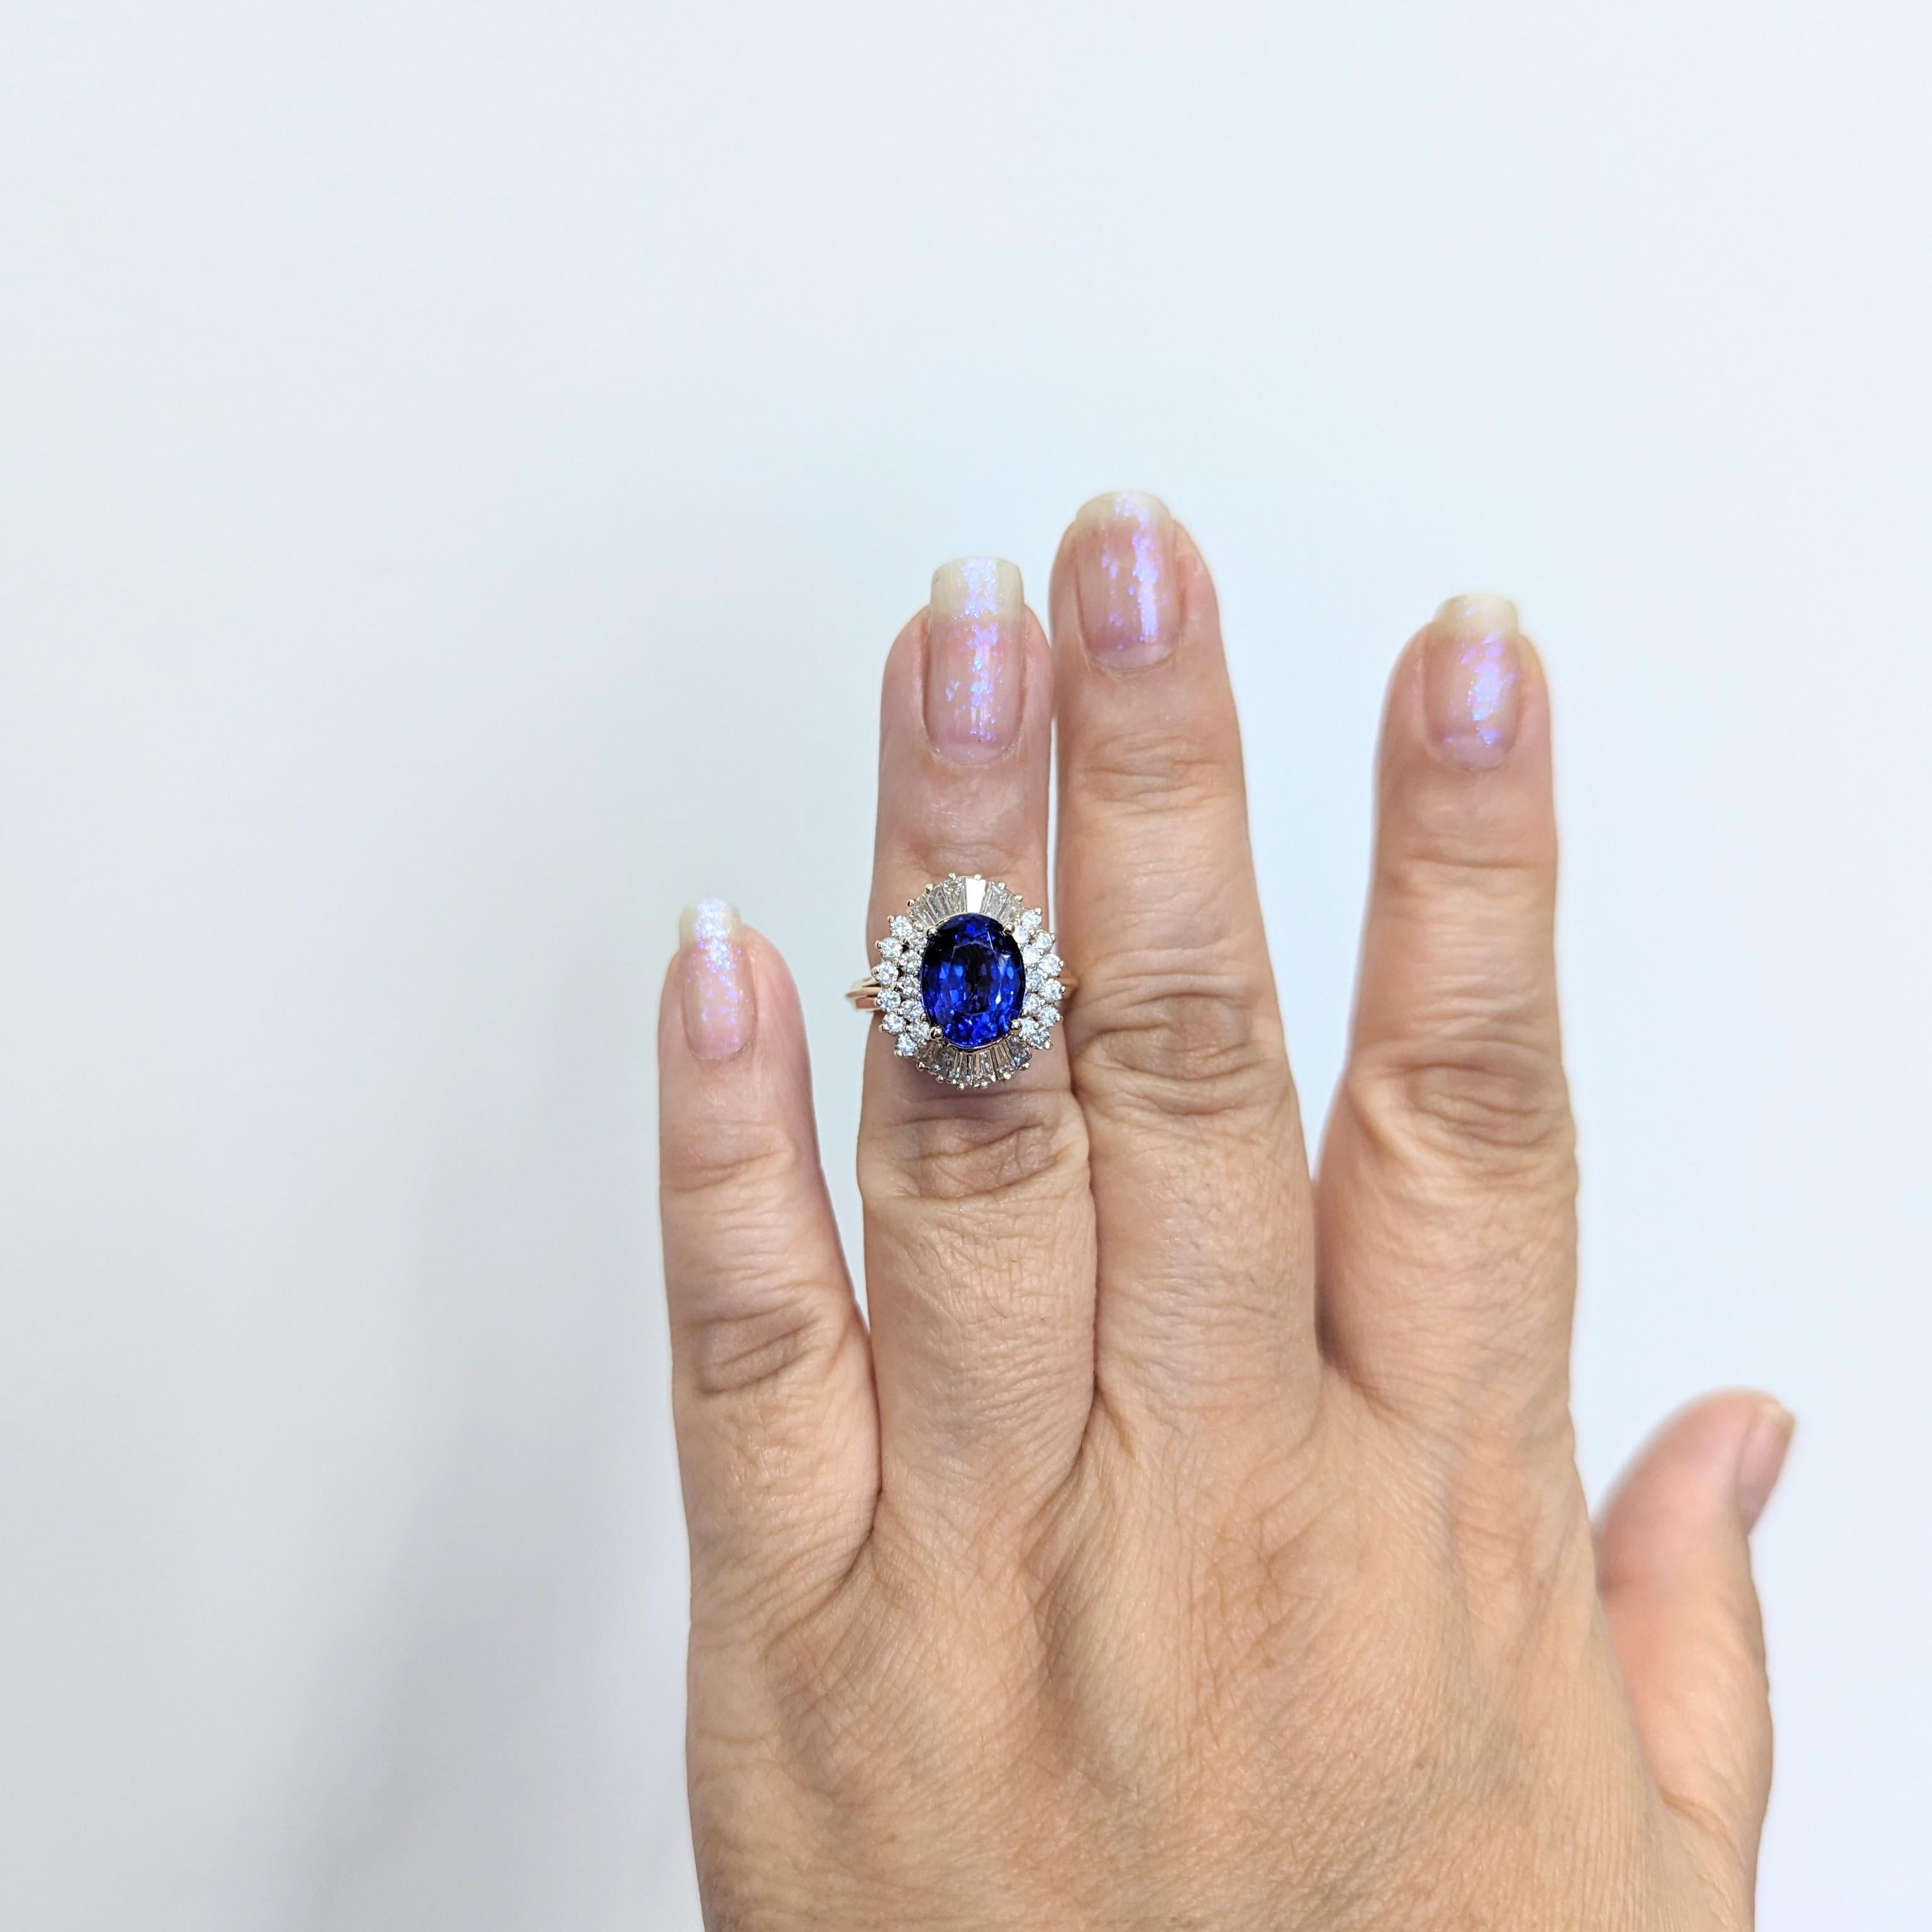 Beautiful 3.45 ct. tanzanite oval with good quality white diamond rounds and baguettes.  Handmade in 14k yellow gold.  Ring size 5.25.